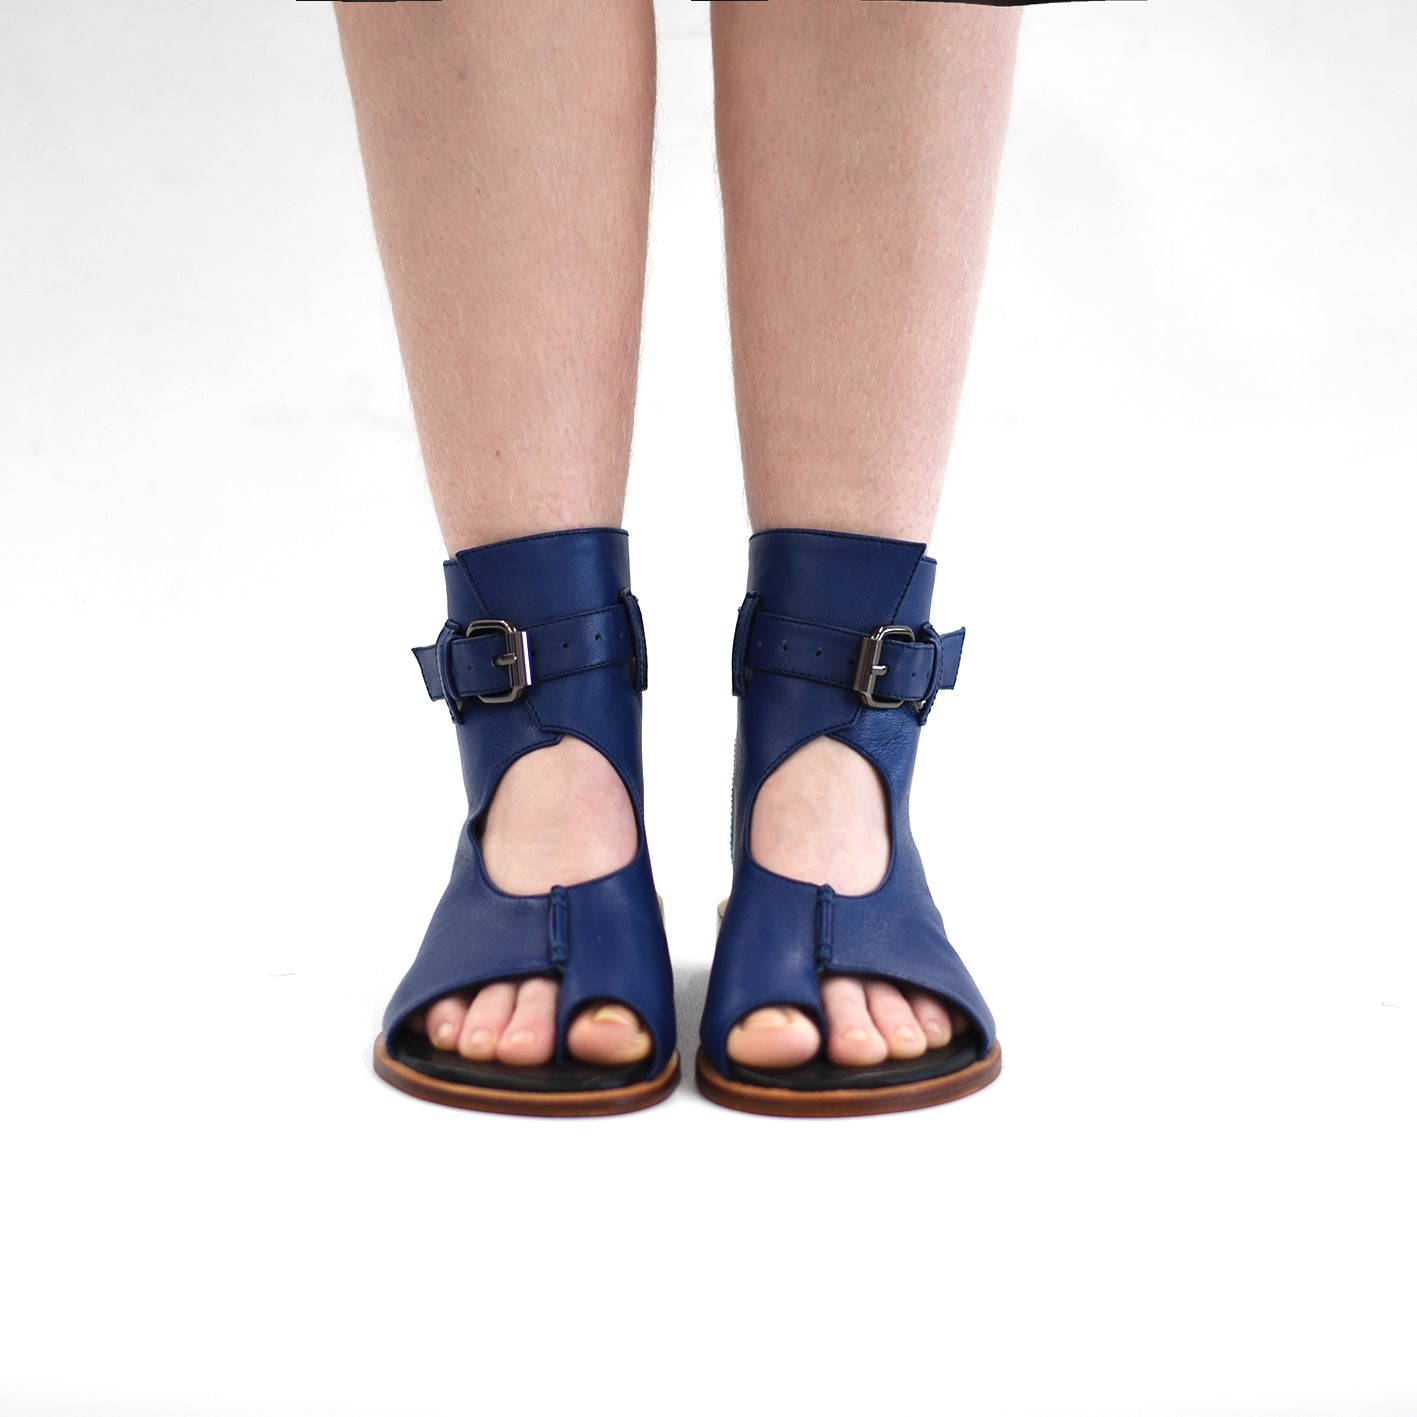 The Augusta Shoe - blue,  Handcrafted sandals with a simple yet elegant design